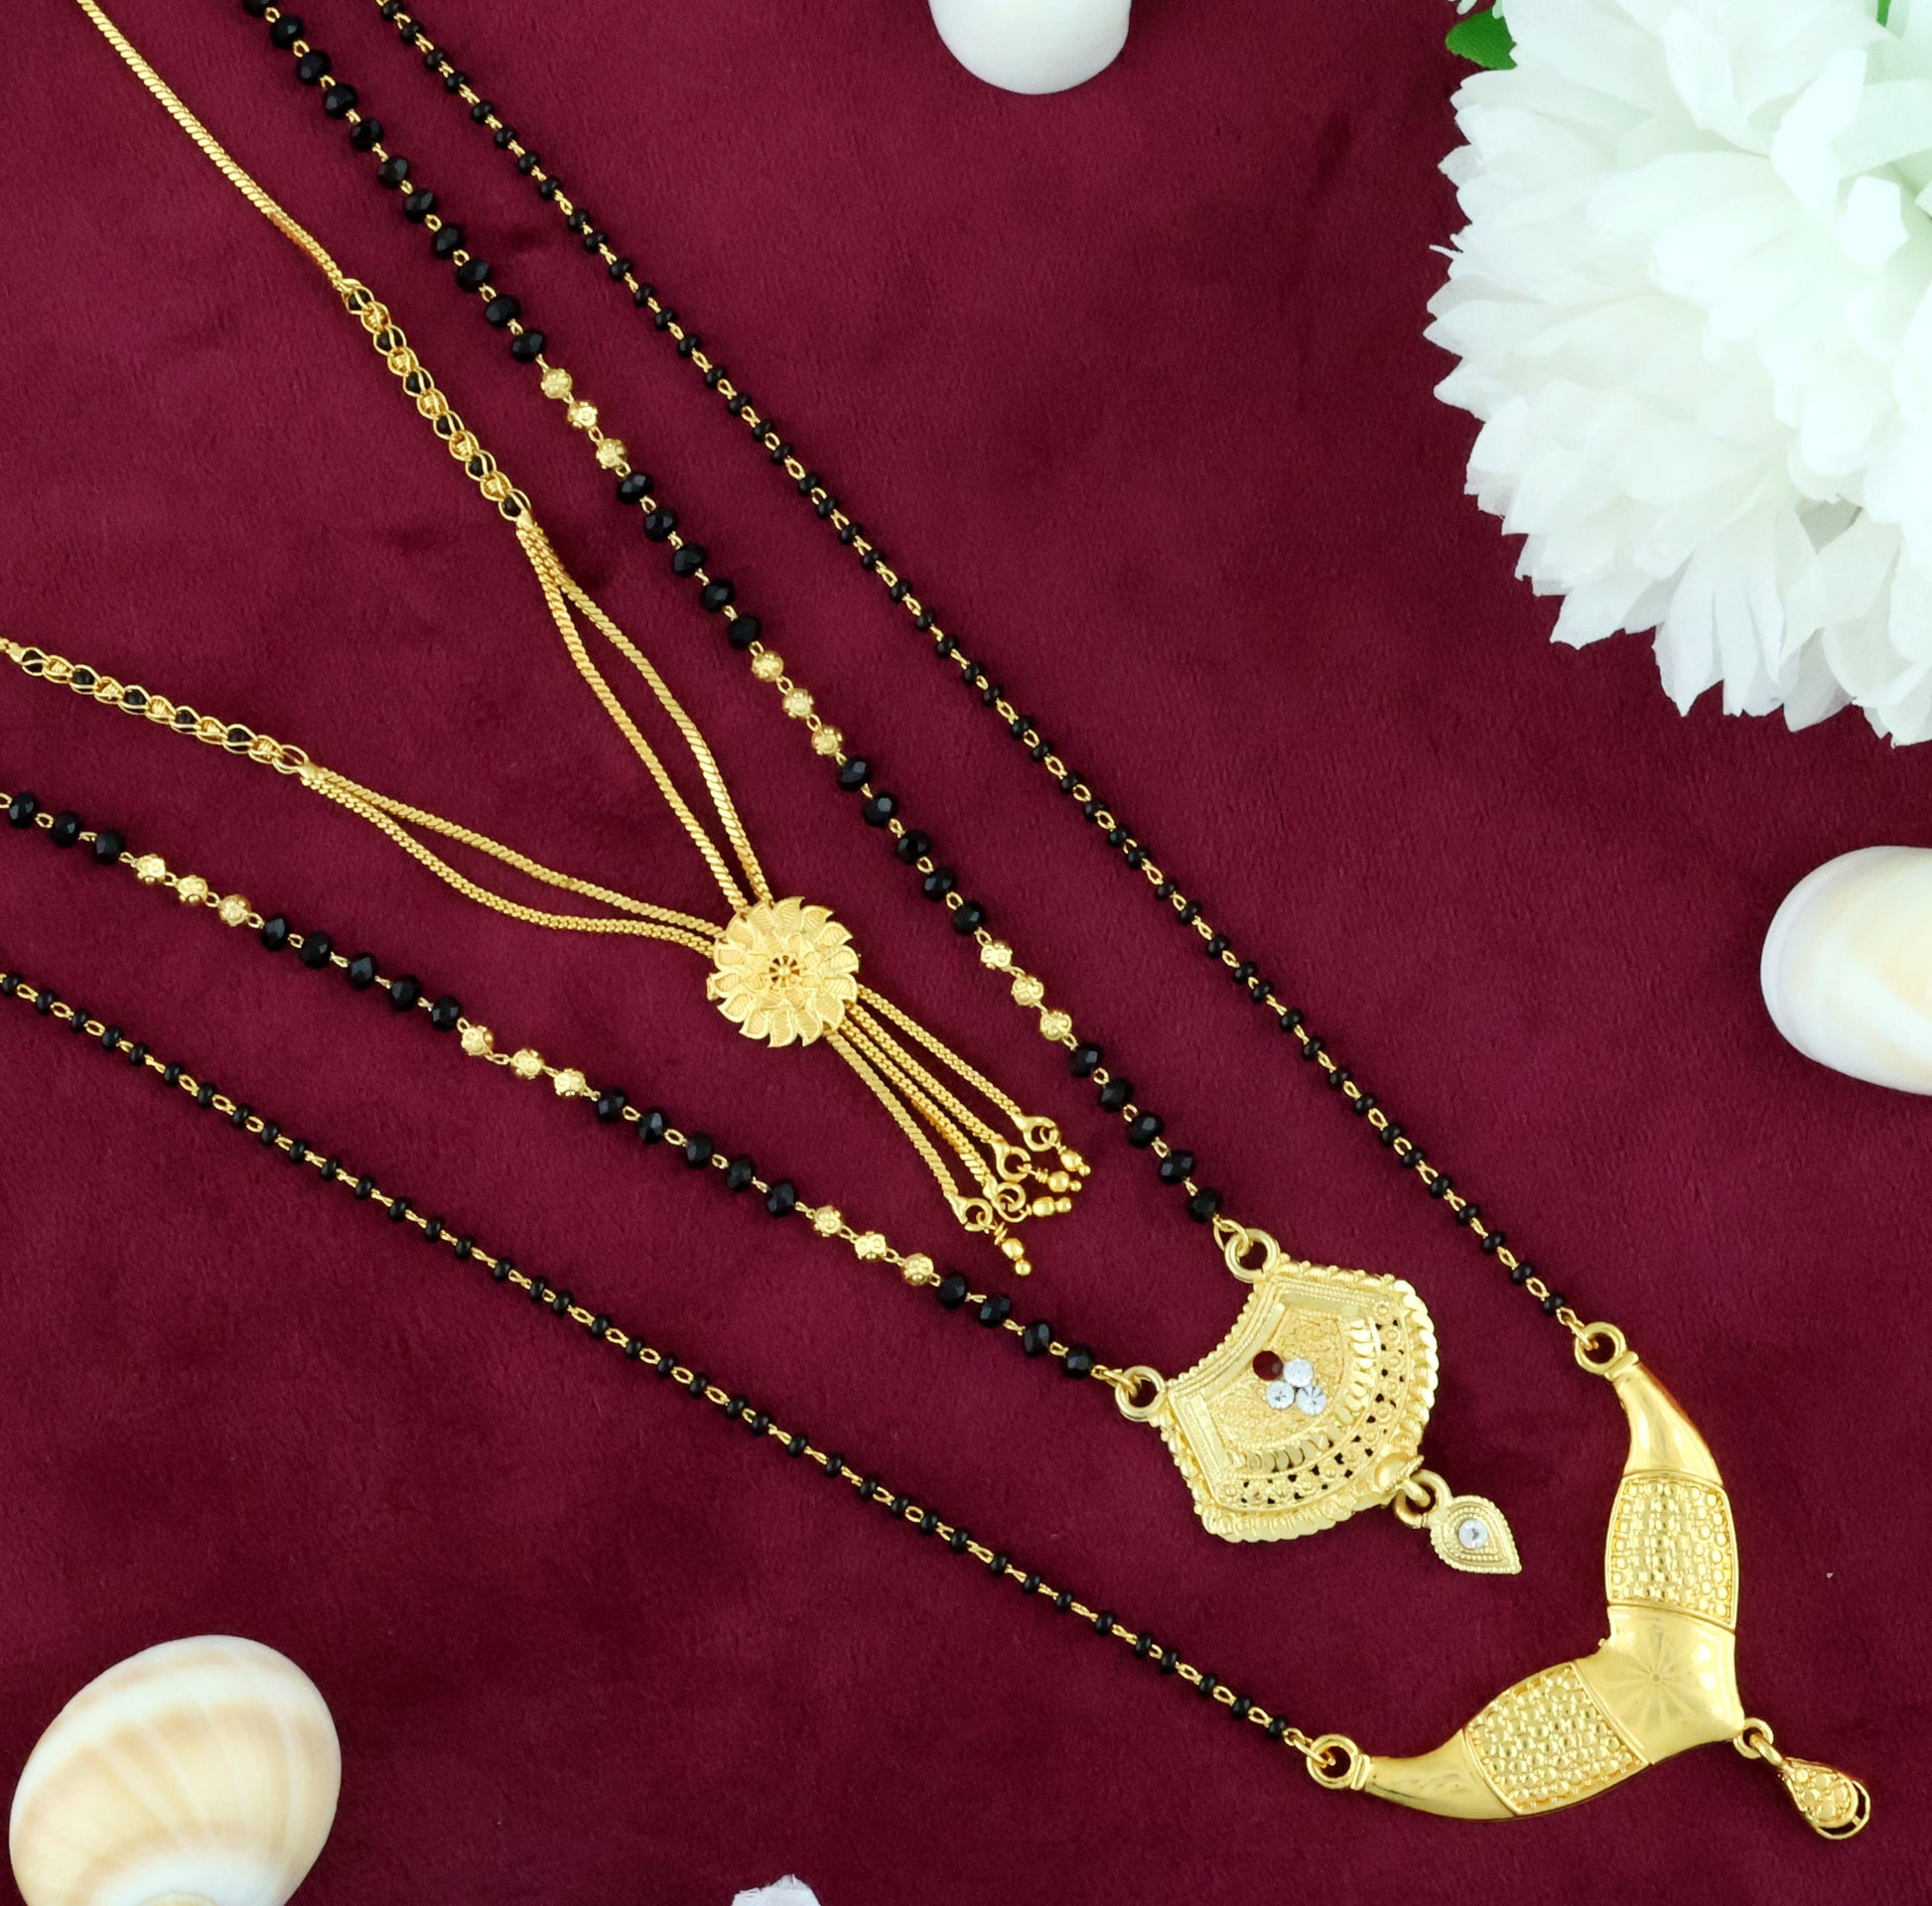 Mekkna Women's Pride Traditional Gold Plated Combo of  Mangalsutra with Earrings for Women. This Jewellery can be used in Special Occasion like Wedding, Engagements etc. This Necklace can be used in daily life also. Buy This Combo set of Mangalsutra Online from Mekkna.